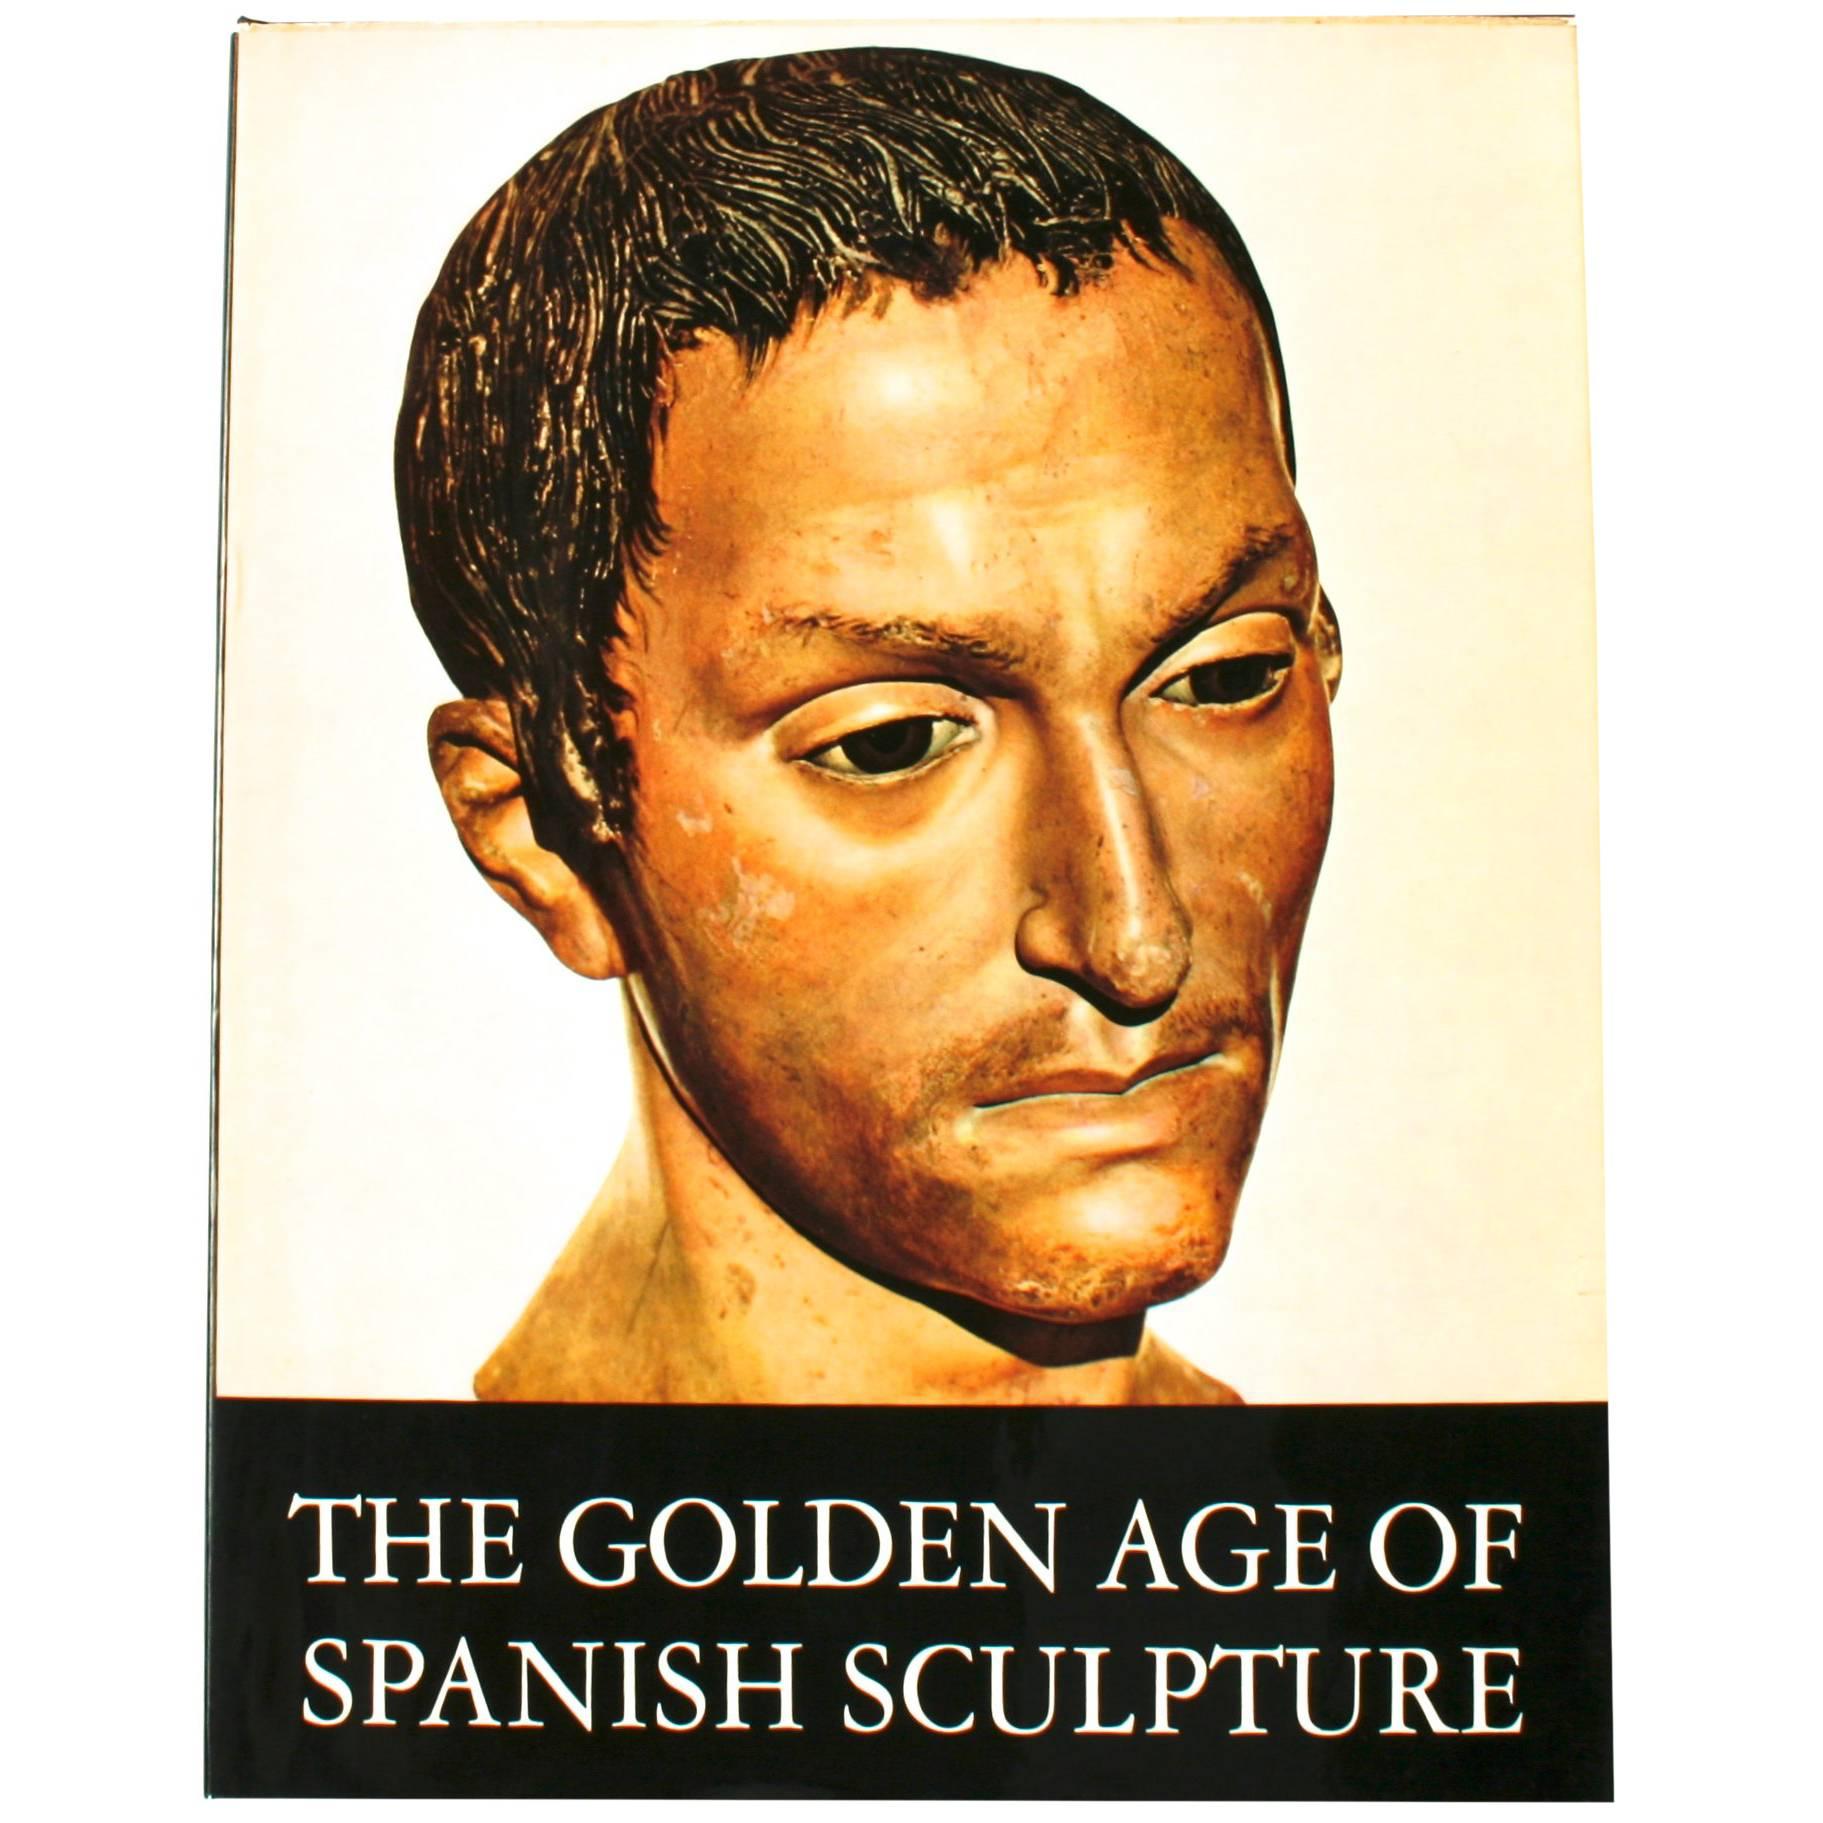 Golden Age of Spanish Sculpture by Manuel Gómez Moreno, First Edition For Sale